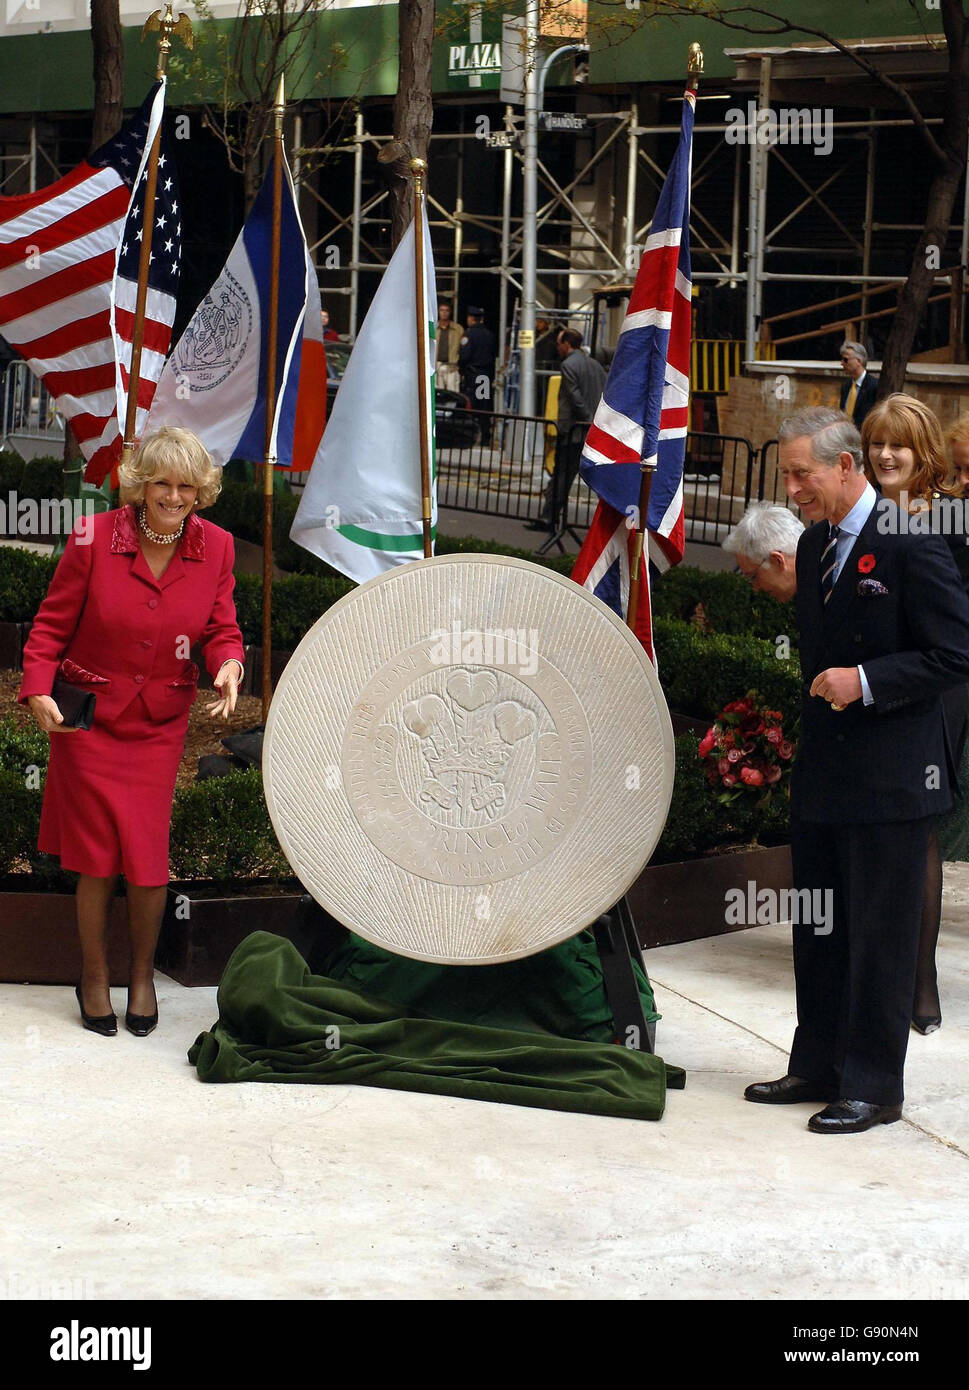 The Prince of Wales with his wife the Duchess of Cornwall, unveil a stone plaque in the British Memorial Gardens in Hanover Square, New York, this afternoon Tuesday November 1, 2005. The garden is a living memorial to the 67 British victims of the terrorist attack on the World Trade Centre, on September 9, 2001. The Prince of Wales and the Duchess of Cornwall arrived in the city at the start of a week-long tour of the USA, which will take them from New York to Washington and on to San Francisco. See PA story ROYAL Charles. PRESS ASSOCIATION Photo. Photo credit should read:John Stillwell/PA Stock Photo